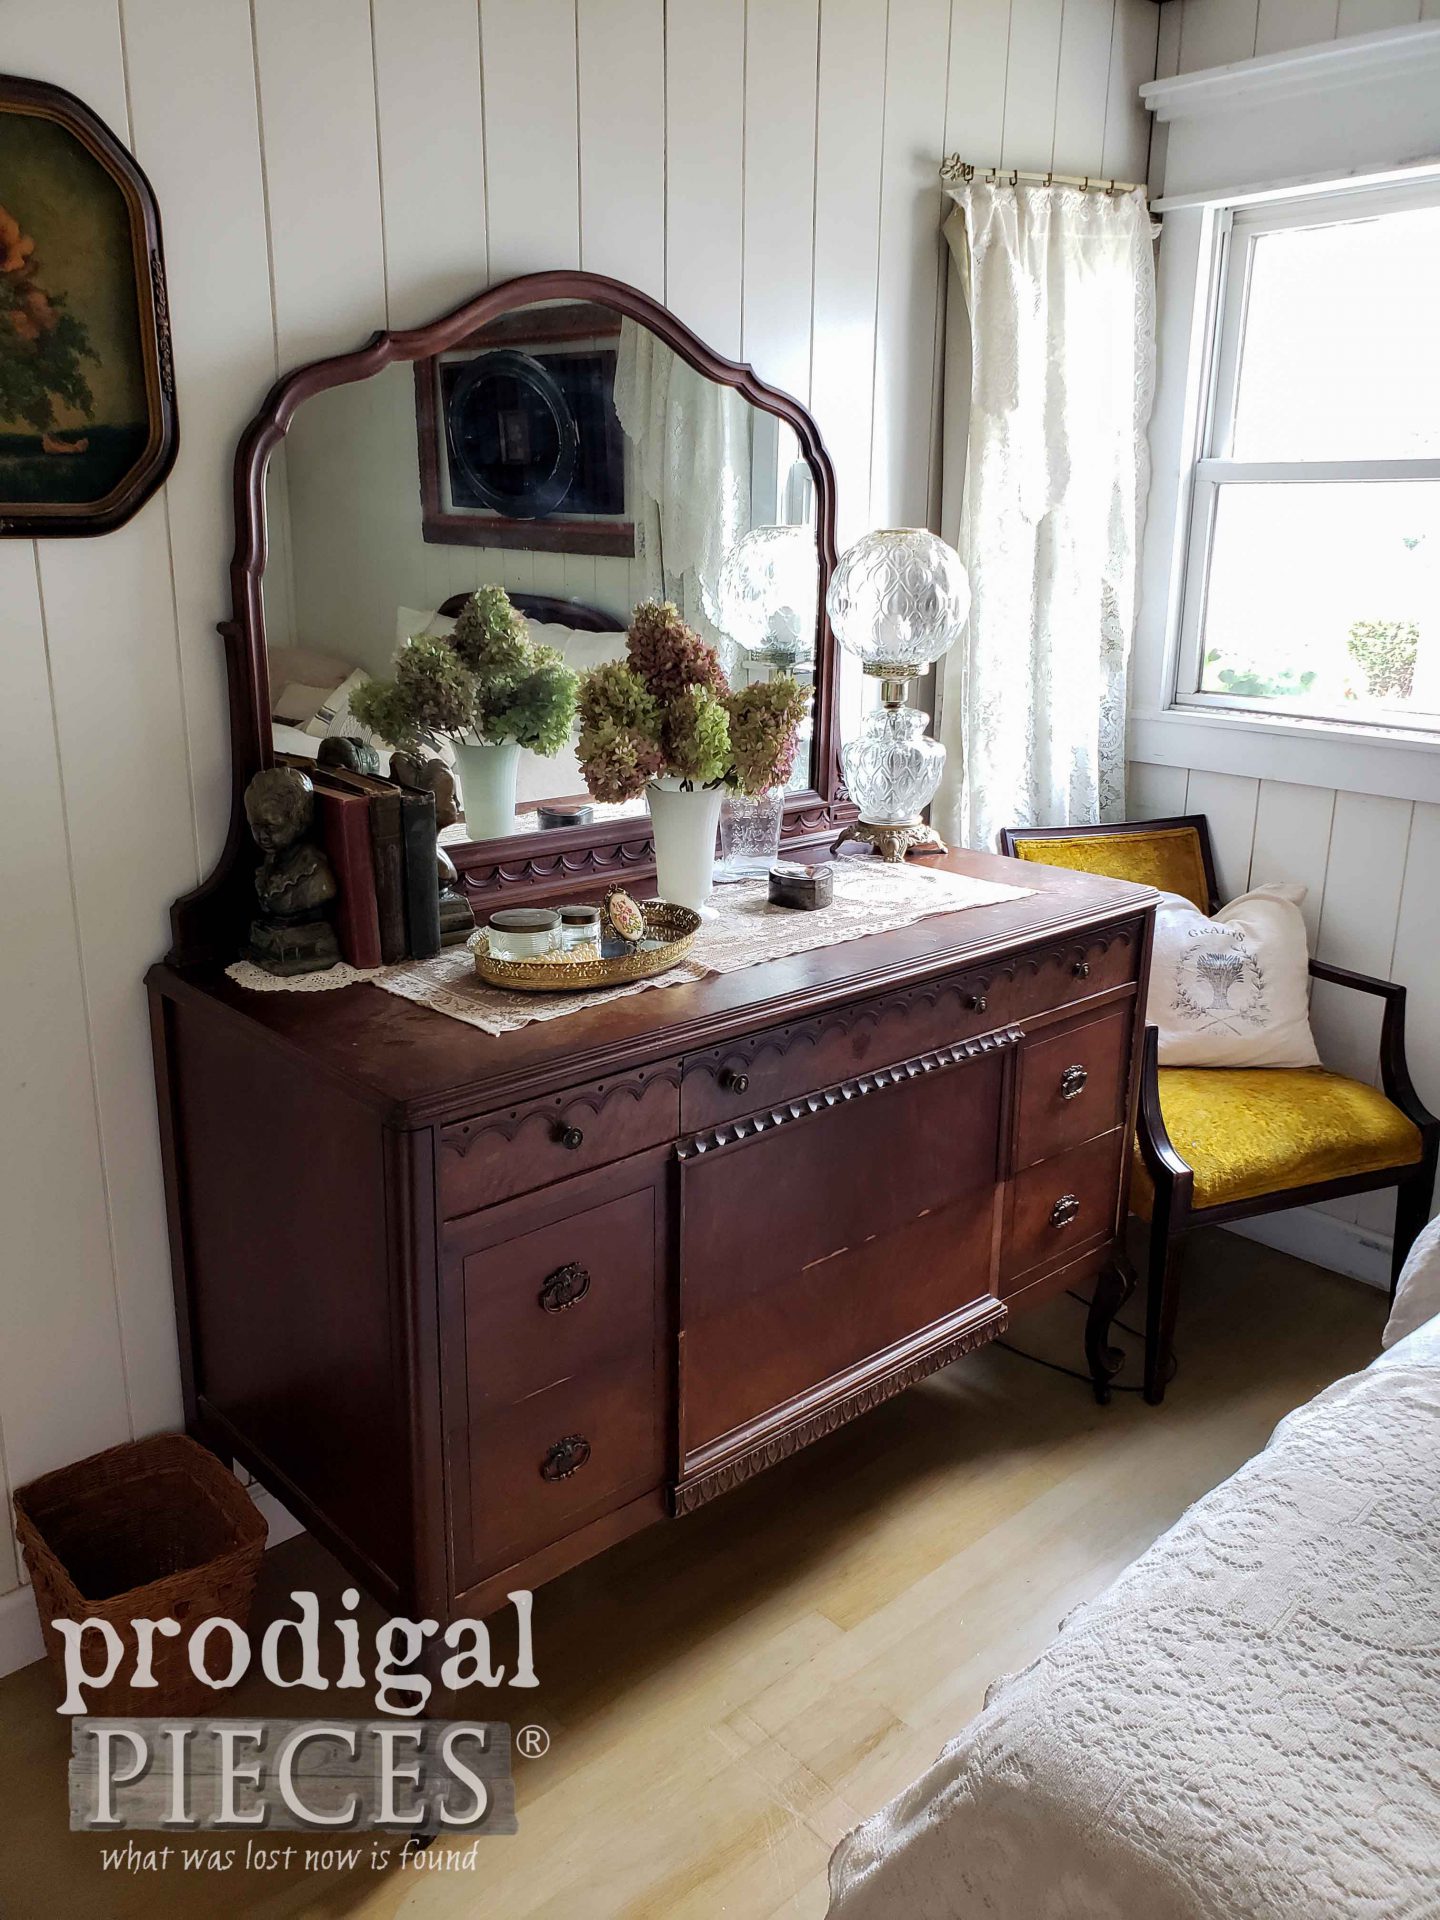 Antique Mirrored Dresser in Farmhouse Bedroom with Fall Decor by Larissa of Prodigal Pieces | prodigalpieces.com #prodigalpieces #bedroom #fall #home #farmhouse #homedecor